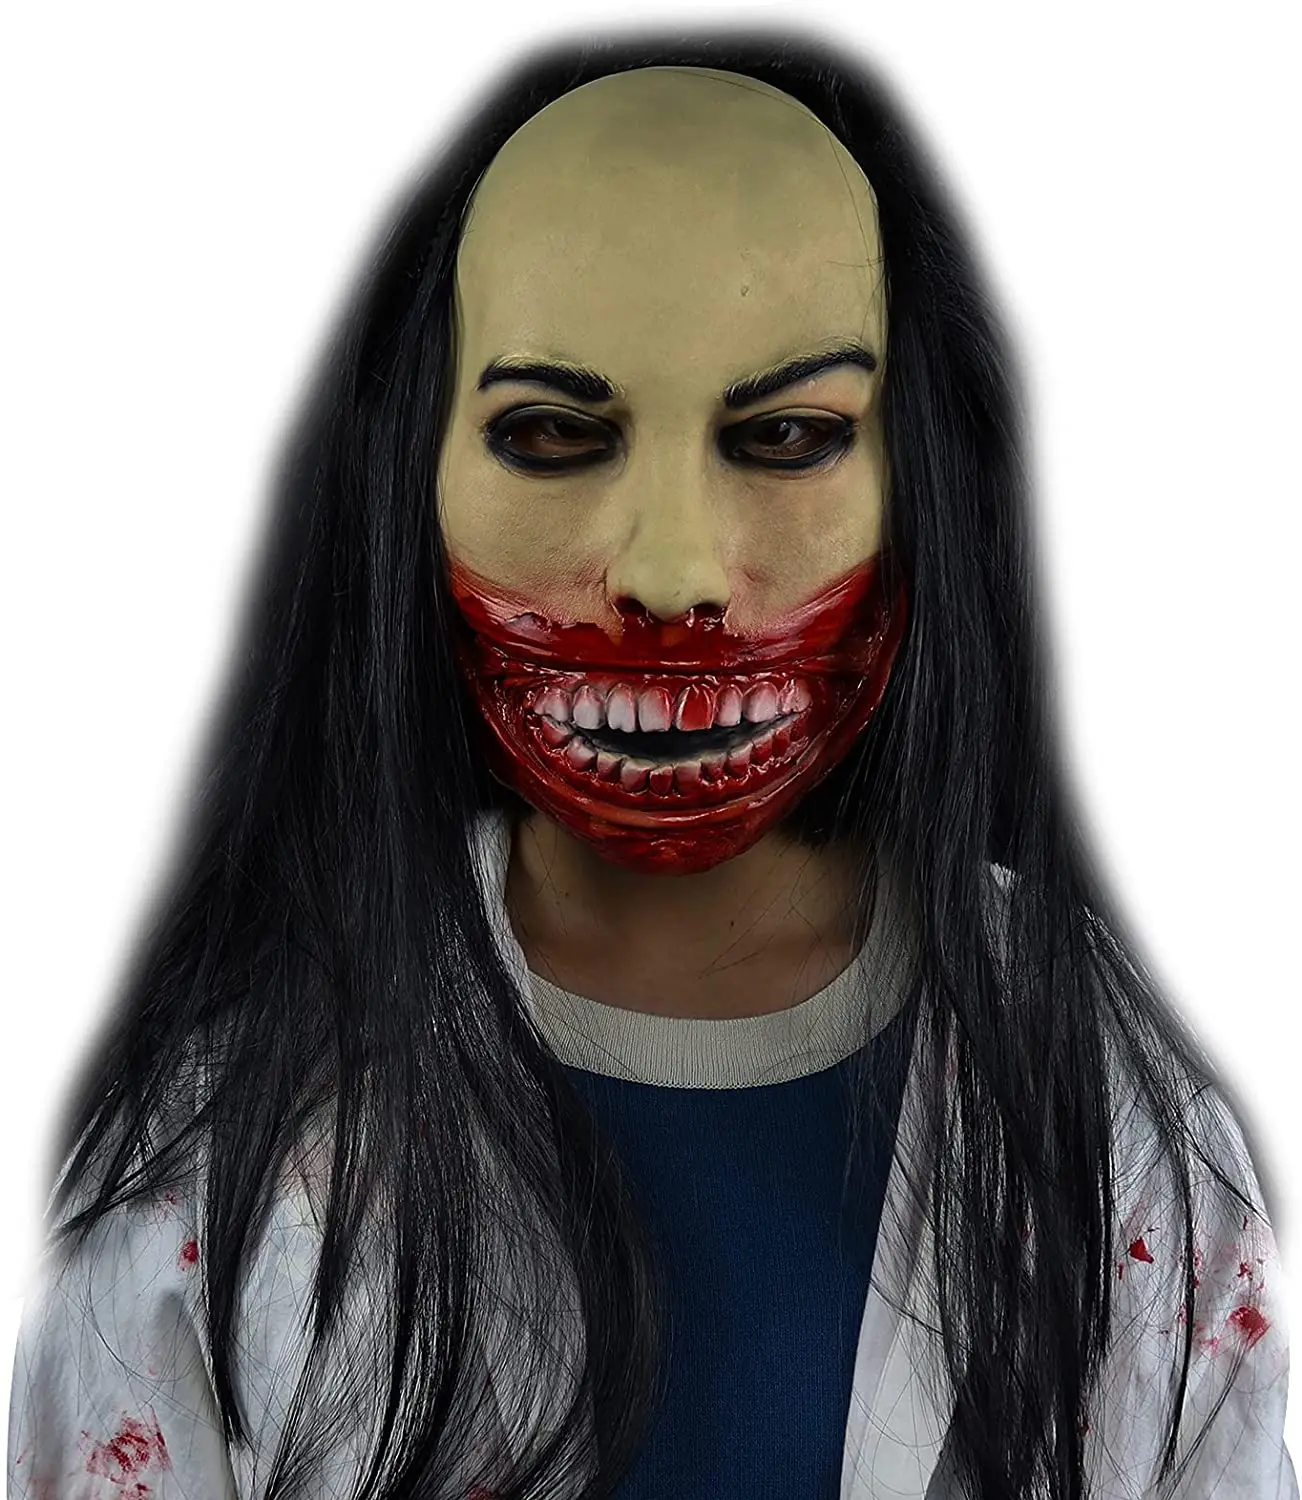 

Horror Grimace Ghost Mask Scary Zombie Latex Skin with Long Hair Realistic Halloween Cosplay Props Free Shipping